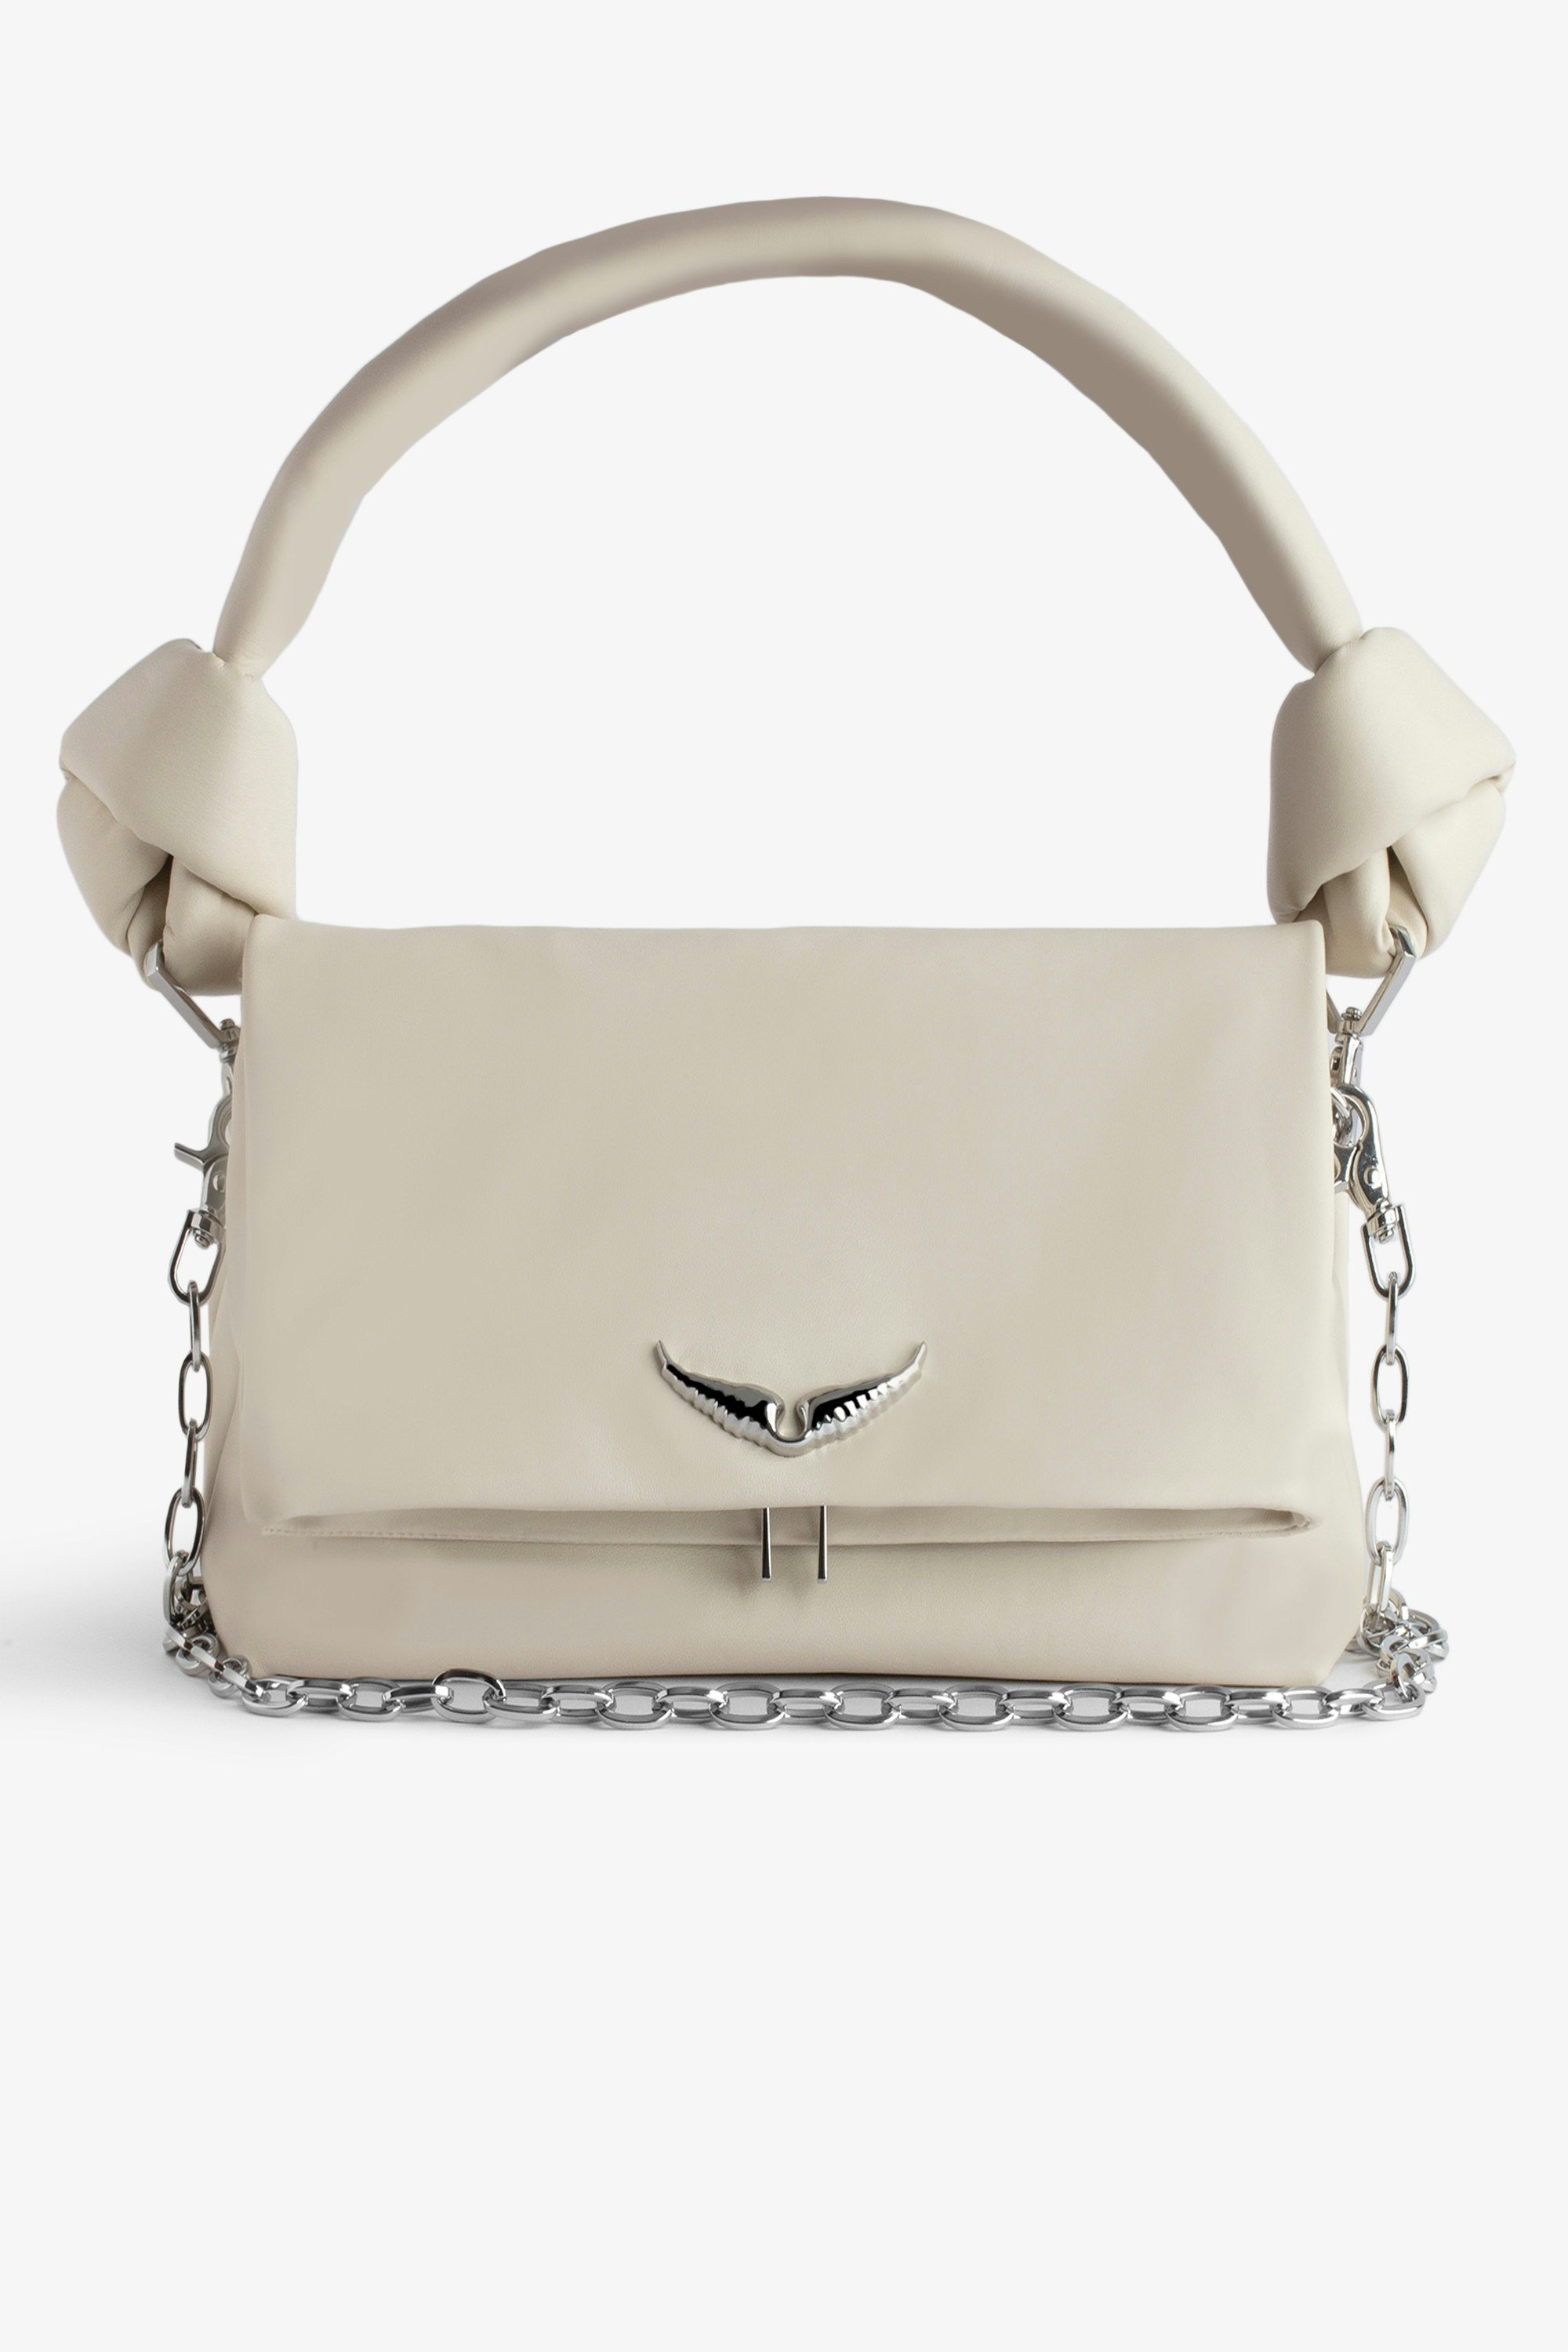 Rocky Eternal Bag - Ecru smooth leather clutch with double leather and chain shoulder strap.